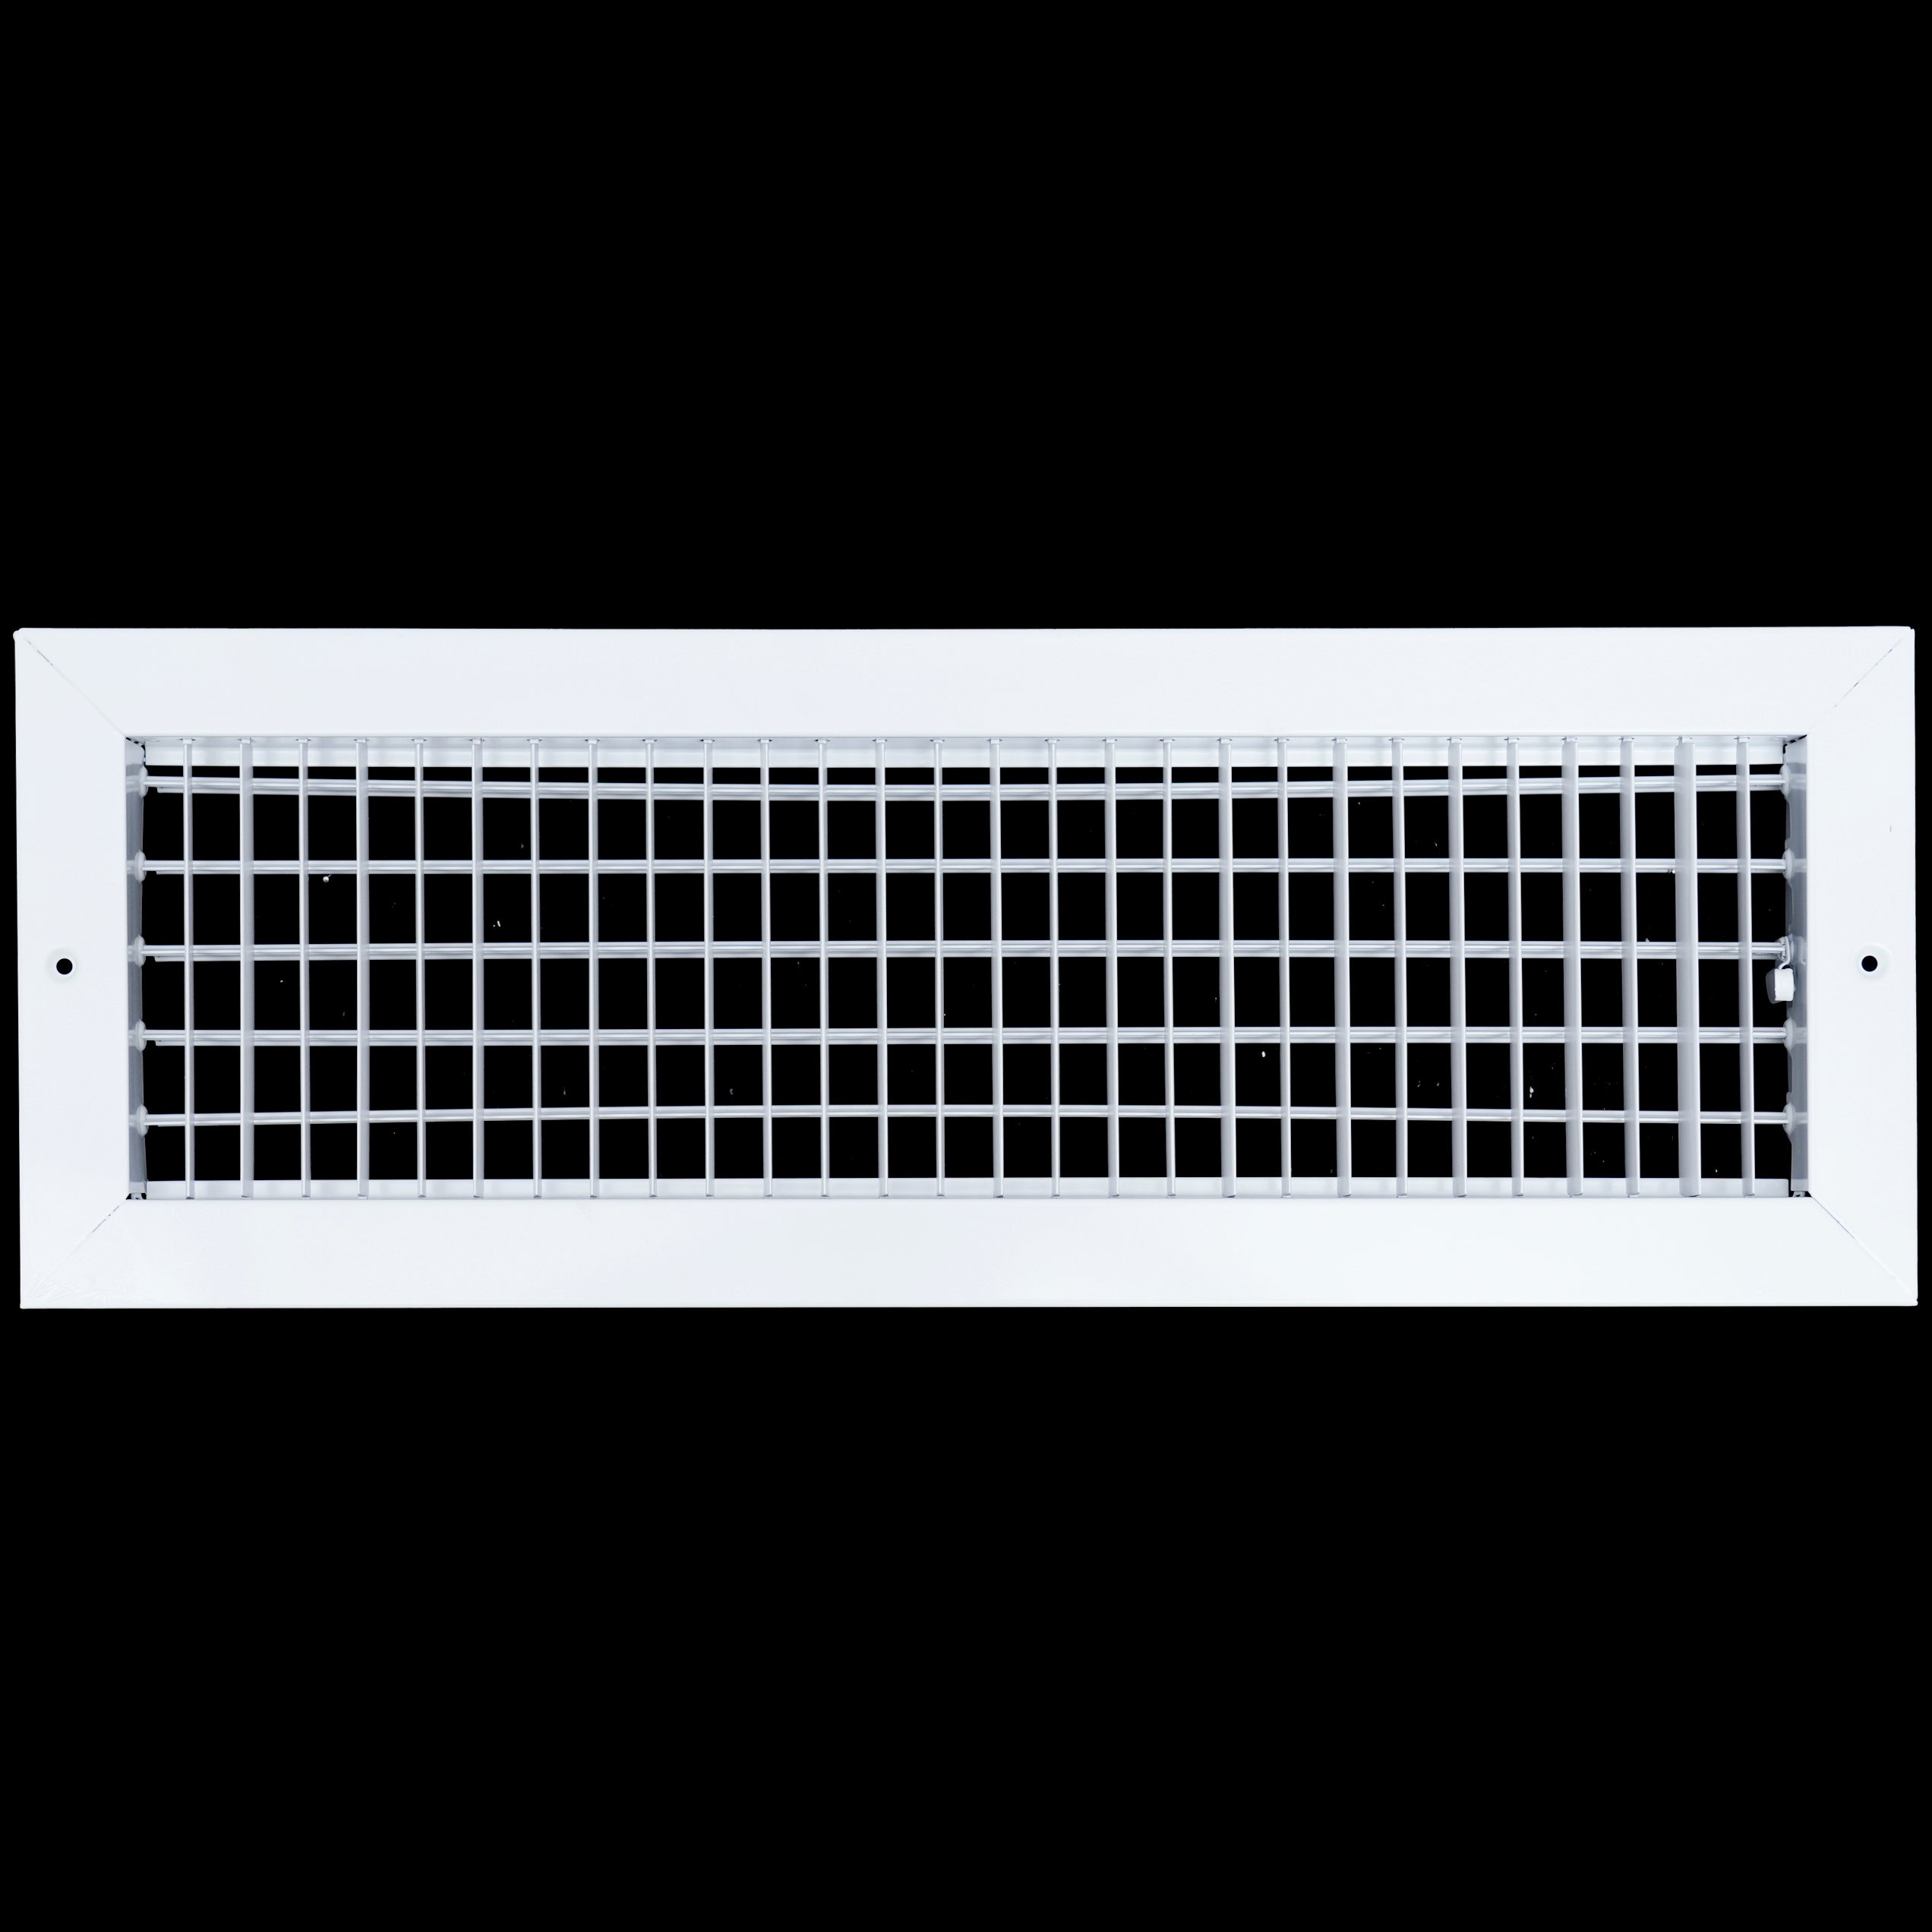 airgrilles 20"w x 6"h steel adjustable air supply grille   register vent cover grill for sidewall and ceiling   white   outer dimensions: 21.75"w x 7.75"h for 20x6 duct opening hnd-adj-wh-20x6  - 1